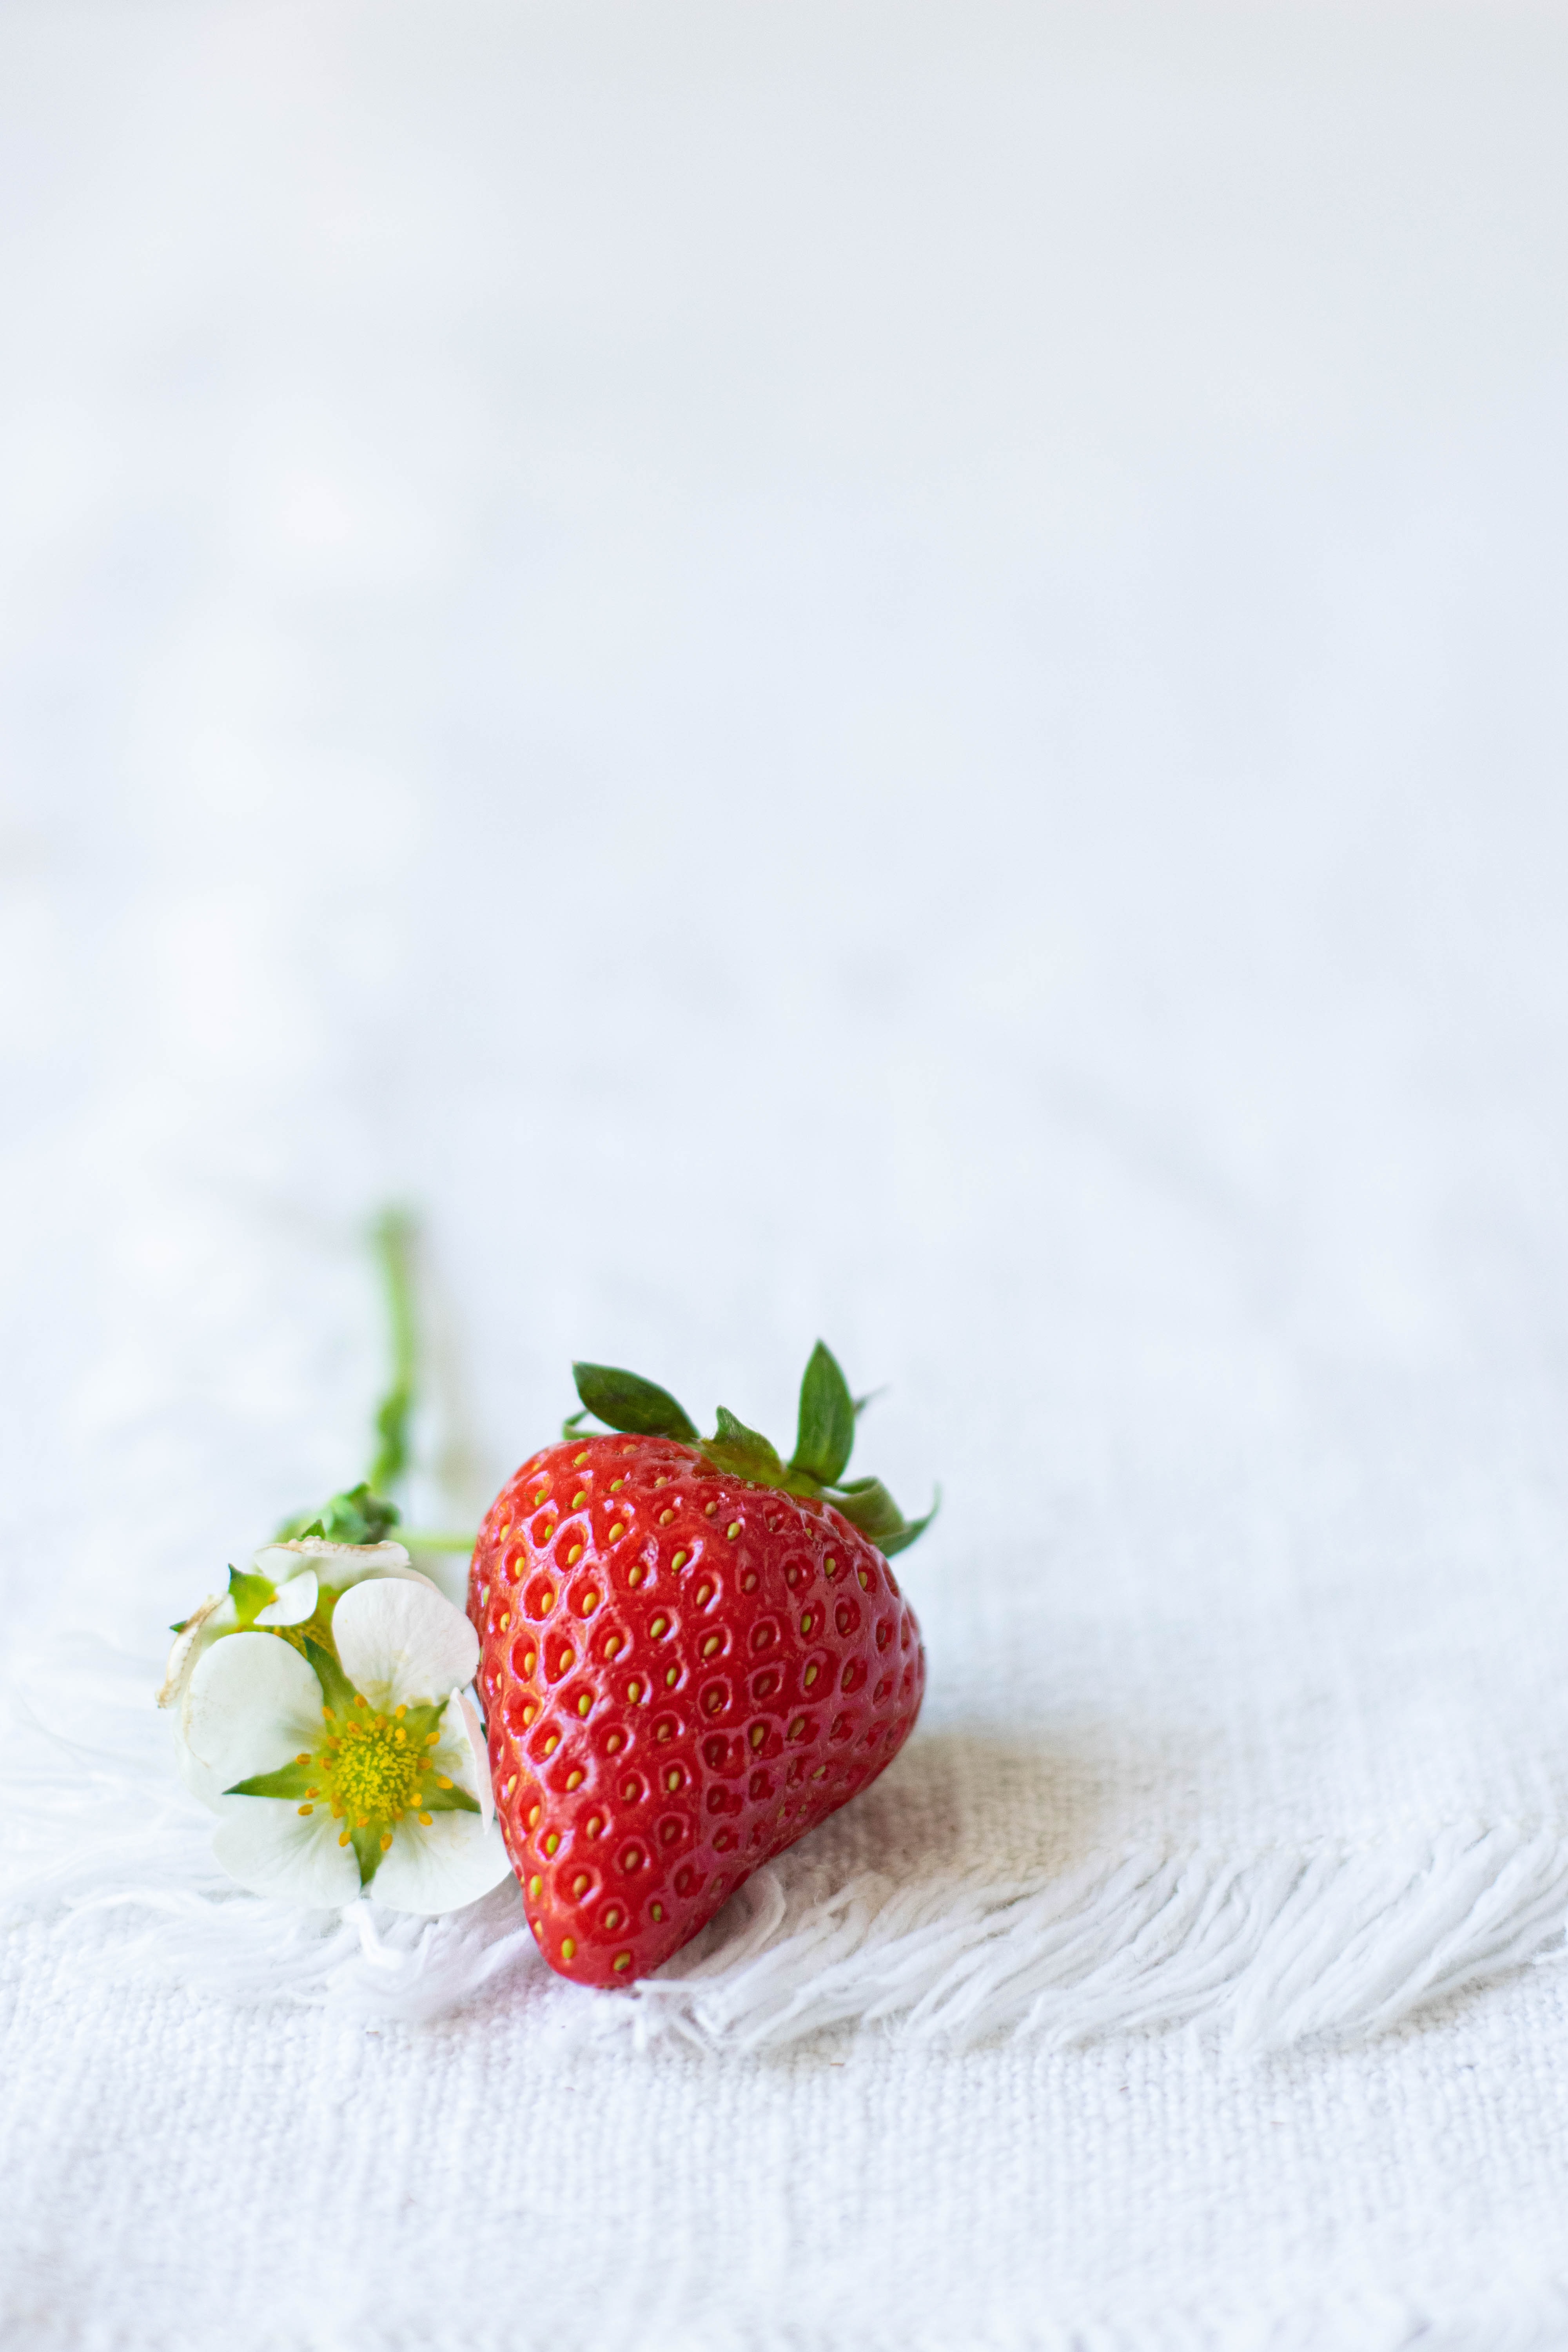 flowers, food, strawberry, cloth, berry 2160p